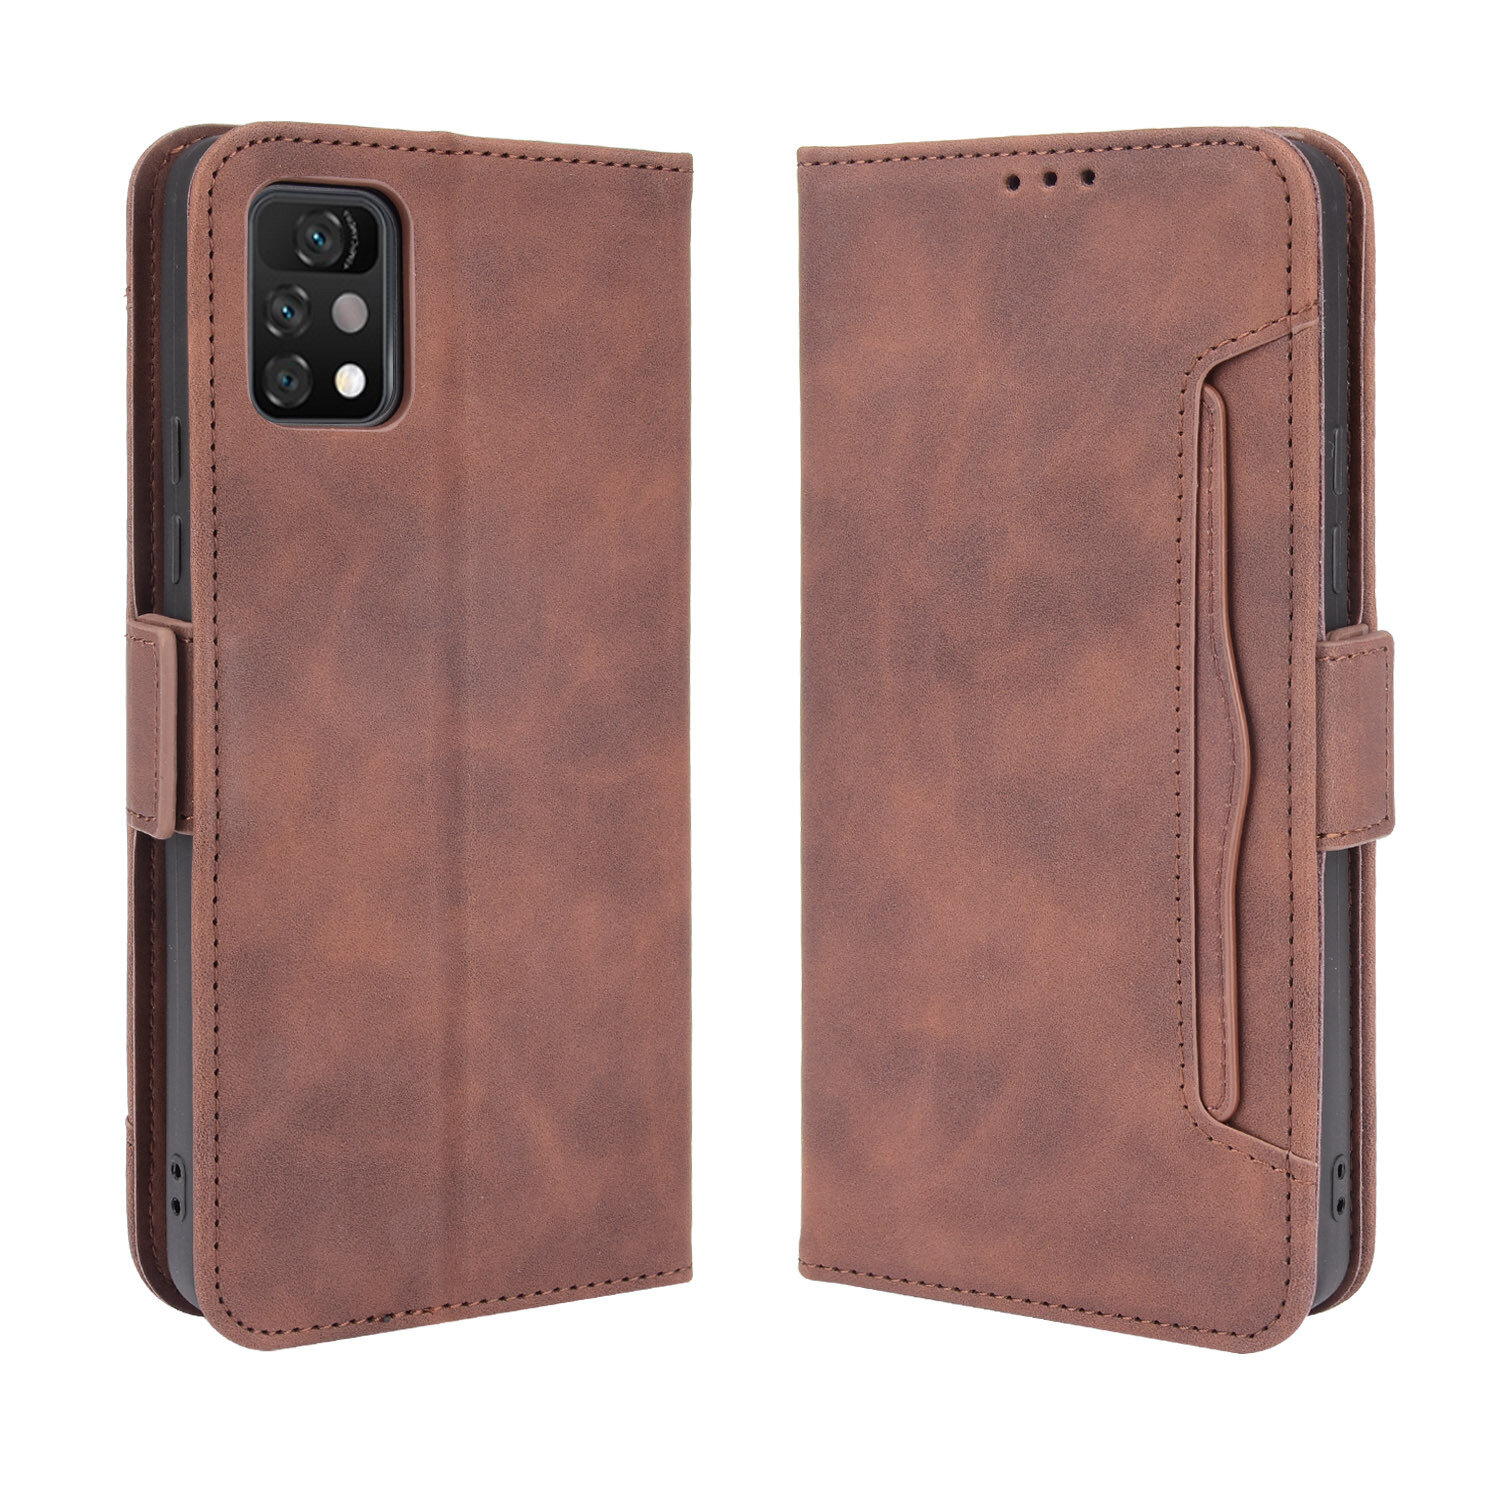 Bakeey for Umidigi A11 Pro Max Case Magnetic Flip with Multiple Card Slot Wallet Folding Stand PU Le